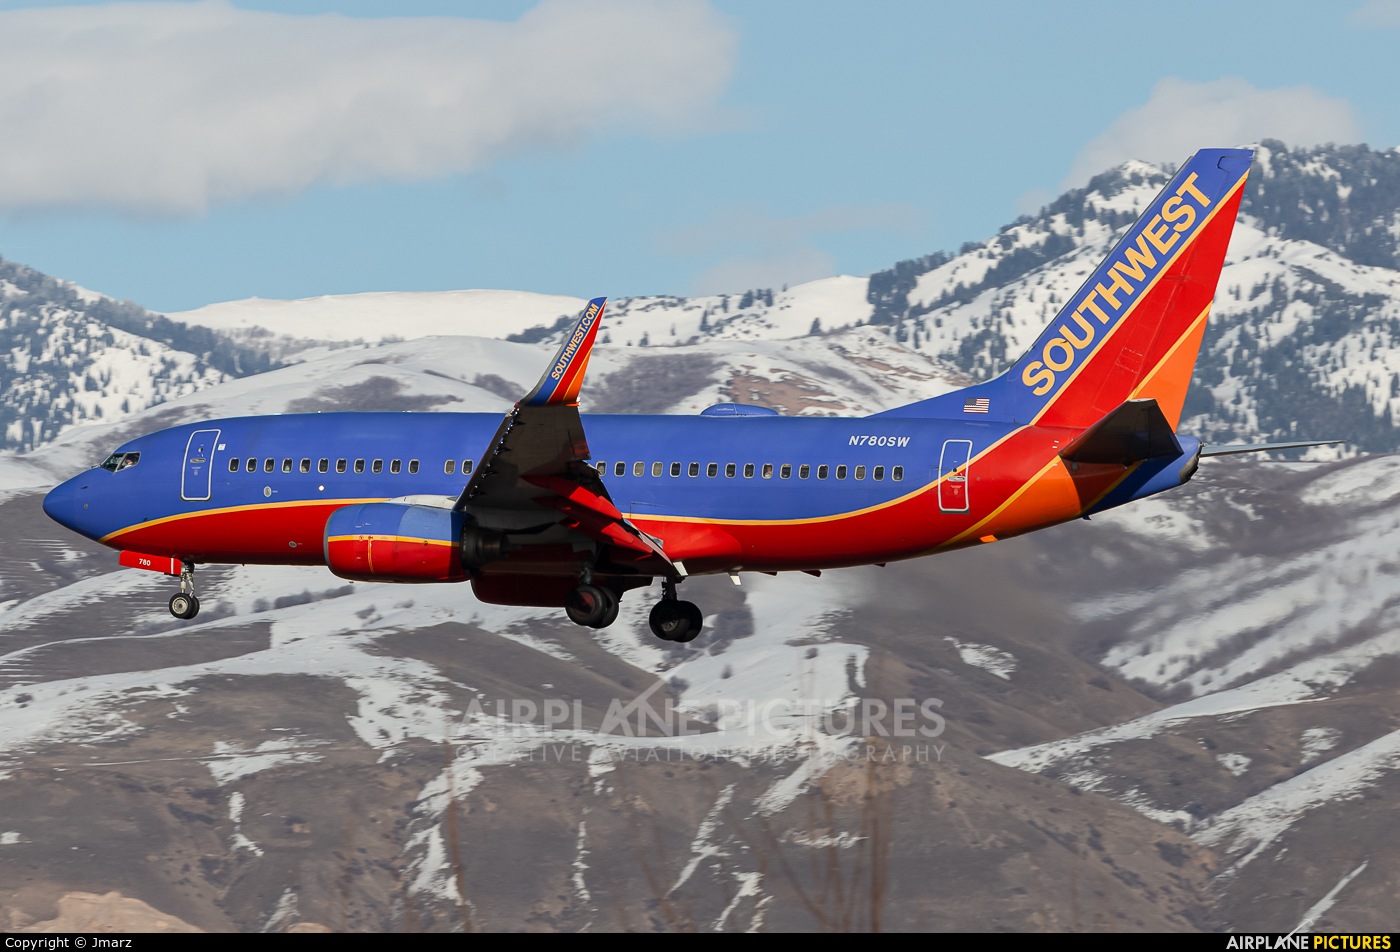 Southwest Airlines N780SW aircraft at Salt Lake City